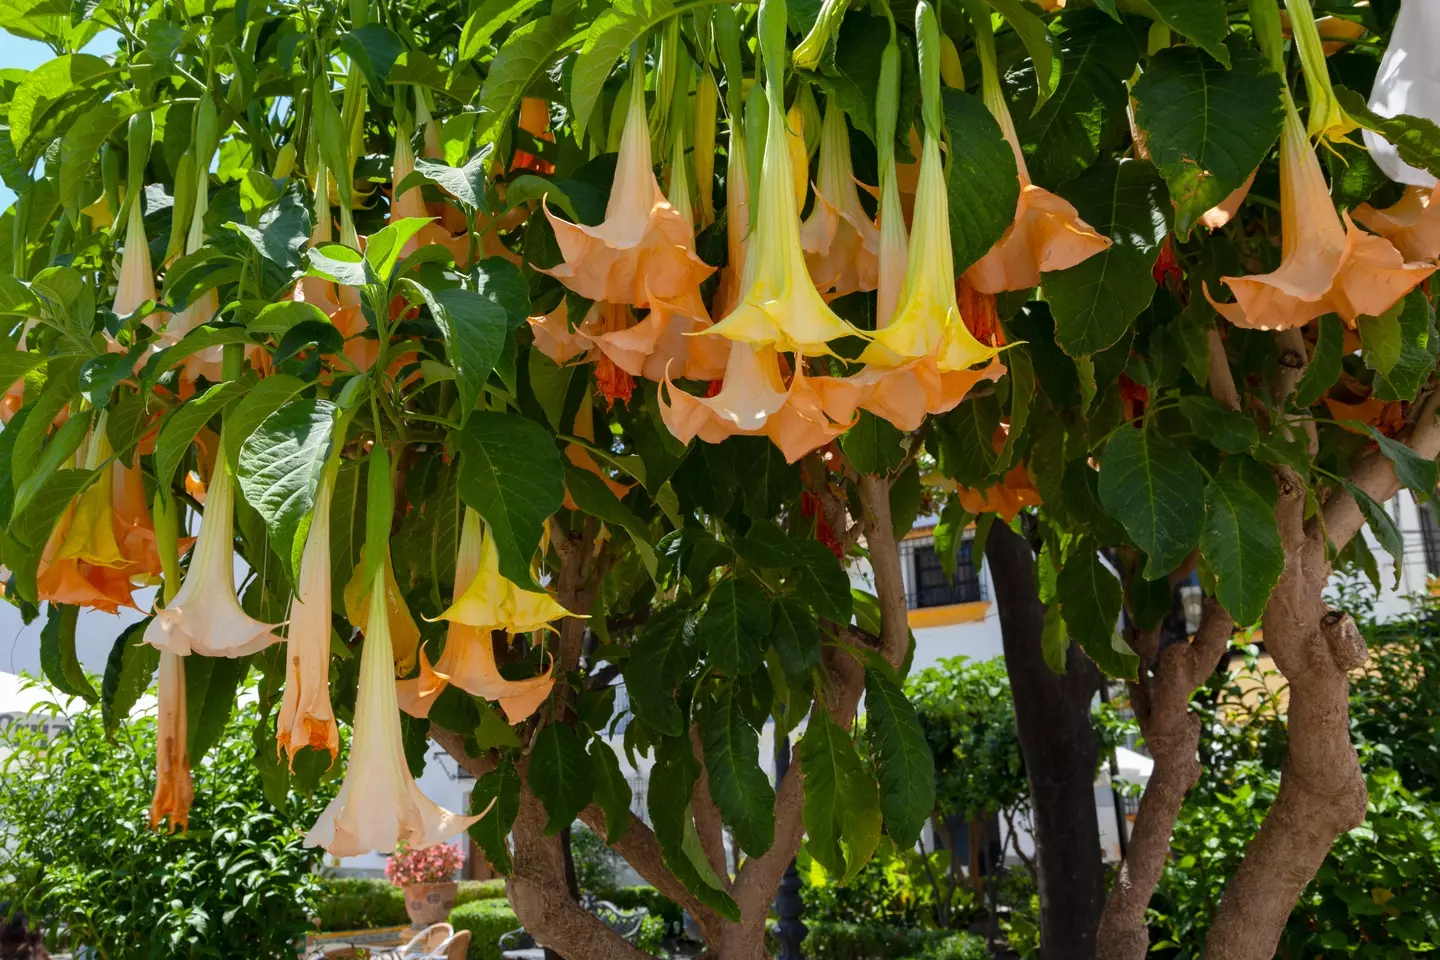 The Datura Stramonium plant, where the 'world's scariest drug' comes from.